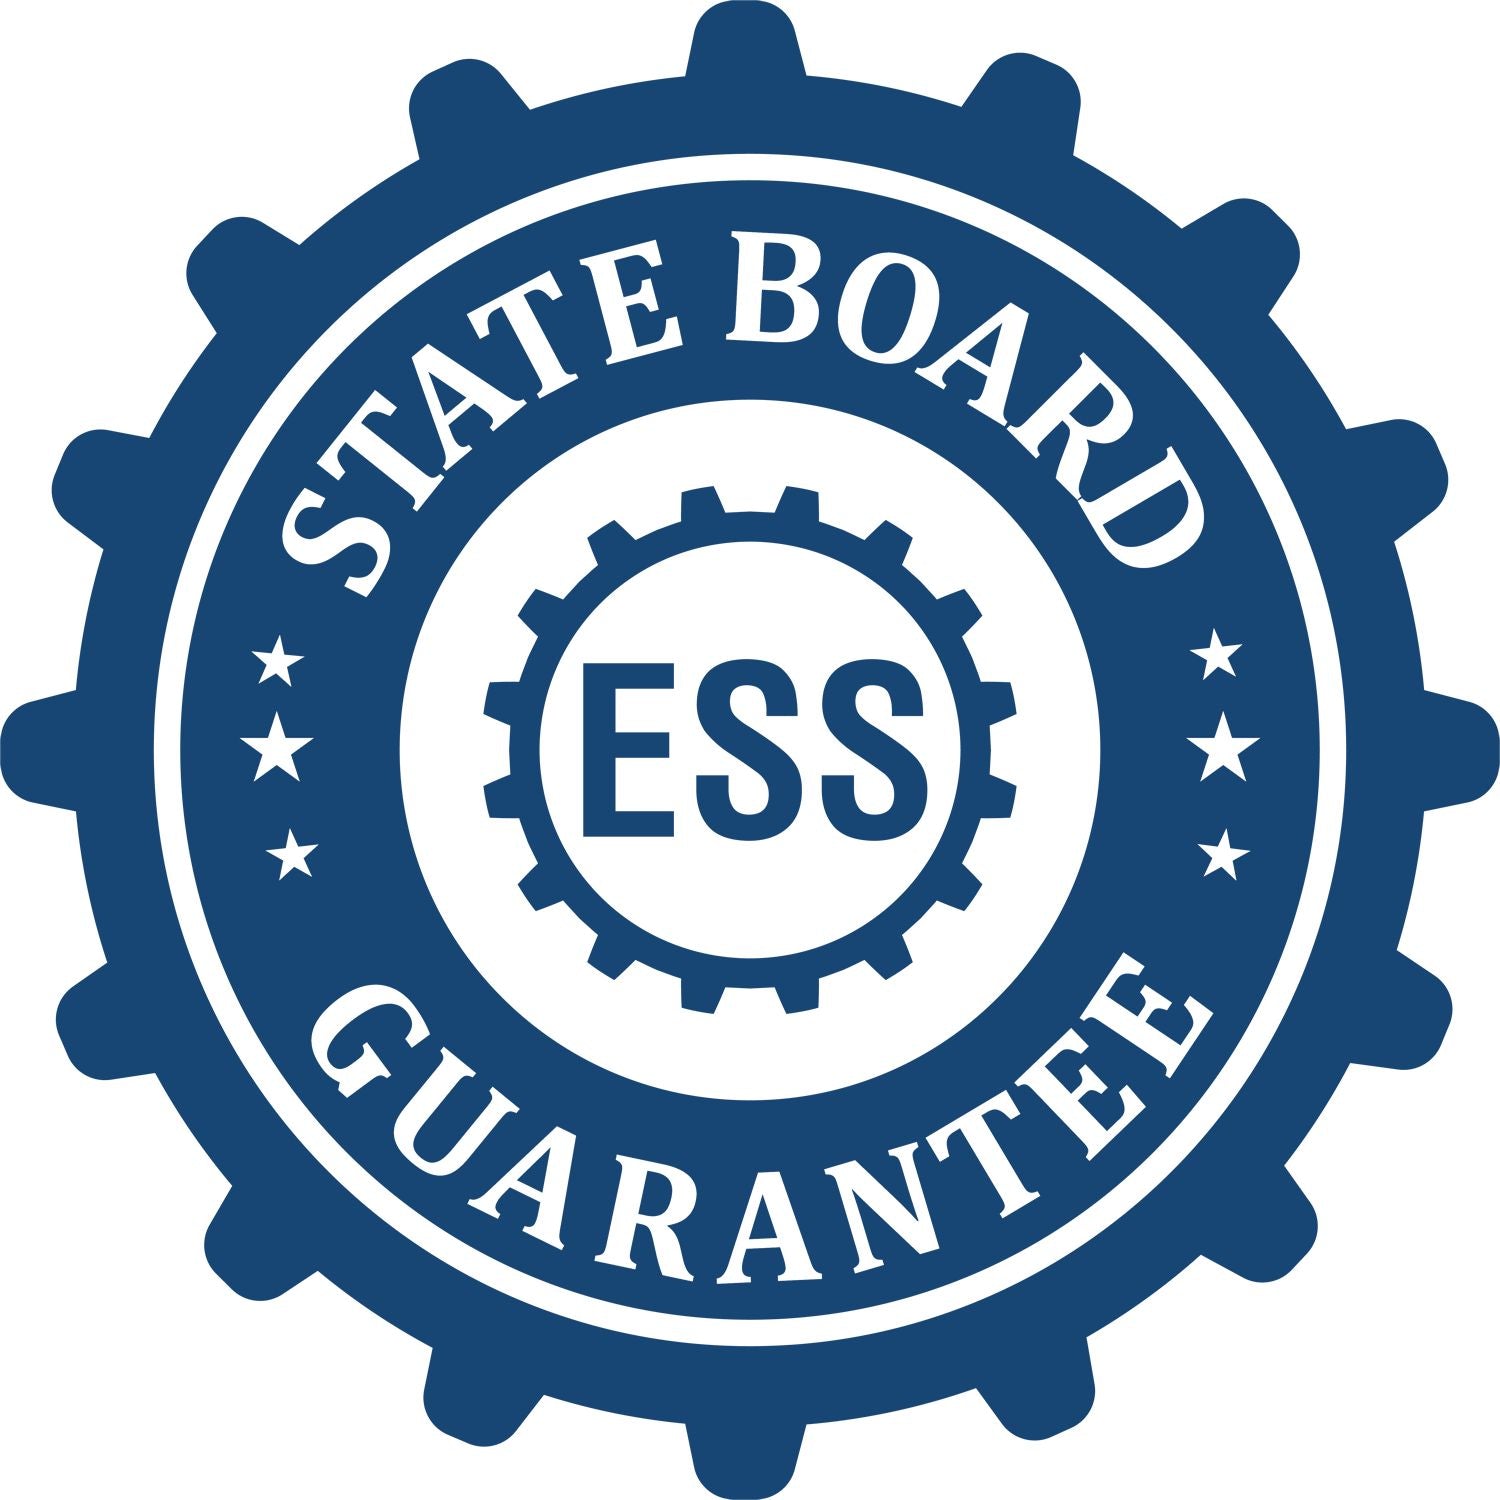 An emblem in a gear shape illustrating a state board guarantee for the Tennessee Desk Landscape Architectural Seal Embosser product.